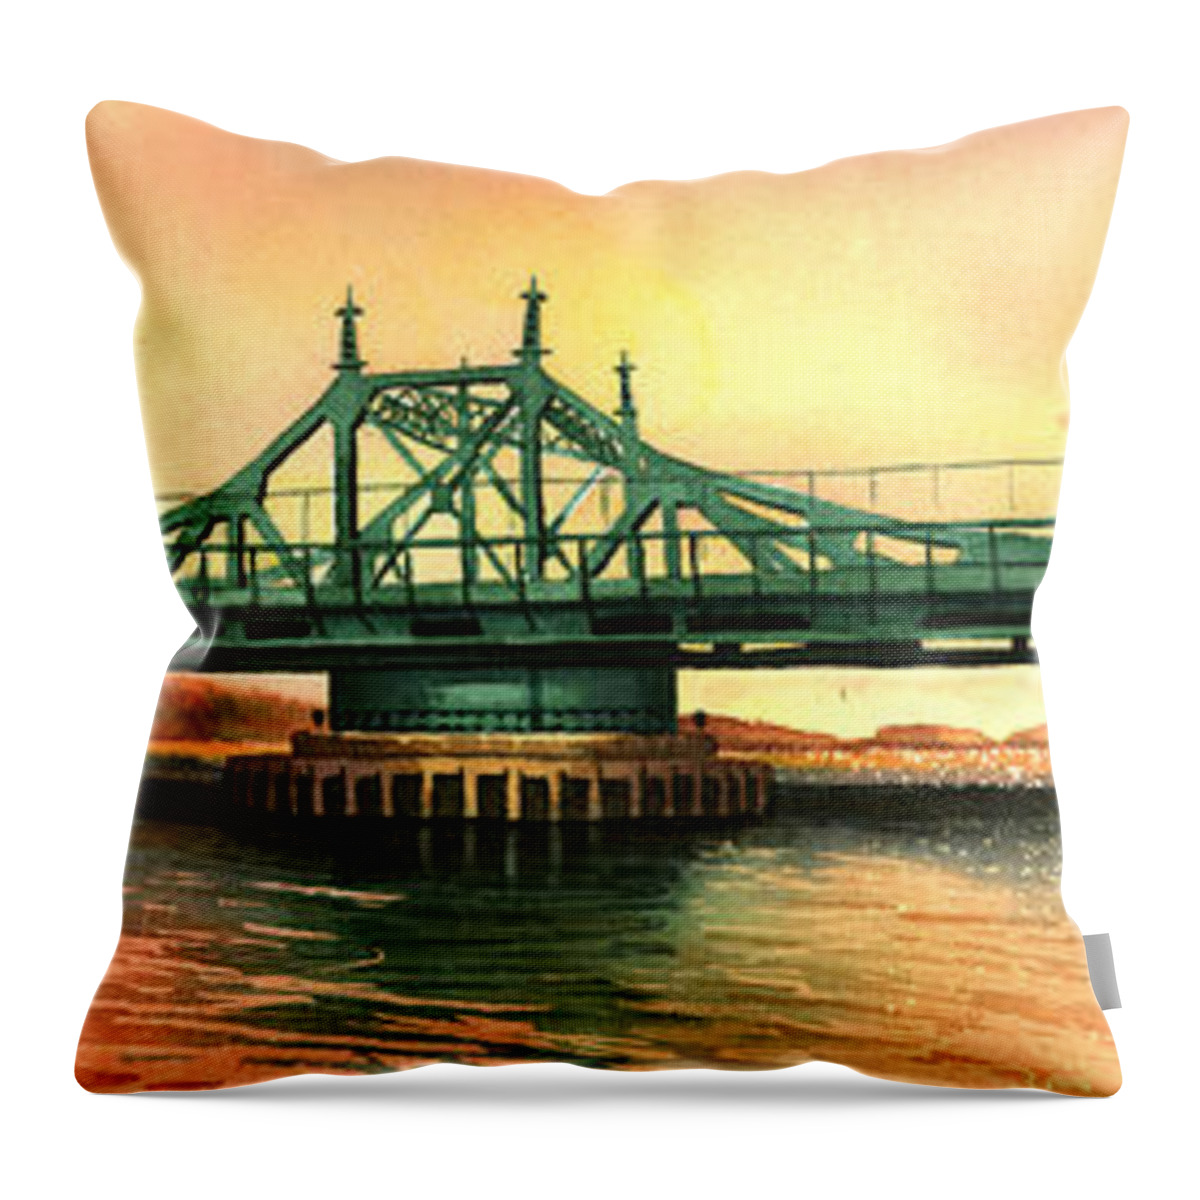 City Island Throw Pillow featuring the painting City Island Bridge Fall by Marguerite Chadwick-Juner